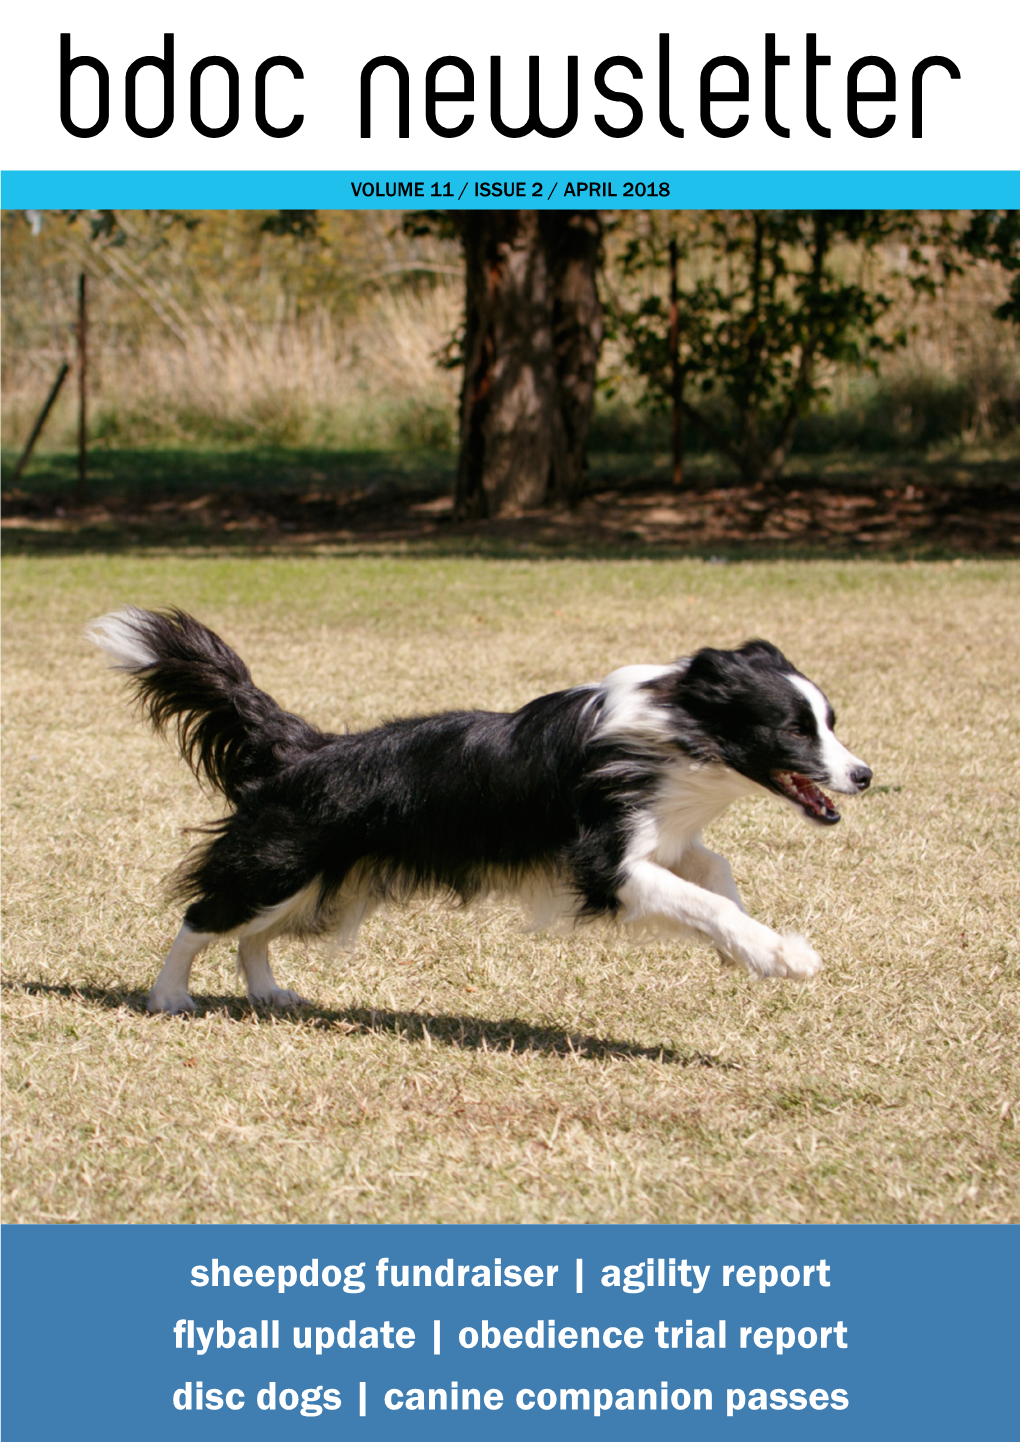 Sheepdog Fundraiser | Agility Report Flyball Update | Obedience Trial Report Disc Dogs | Canine Companion Passes in THIS ISSUE EDITOR’S NOTE About the Club